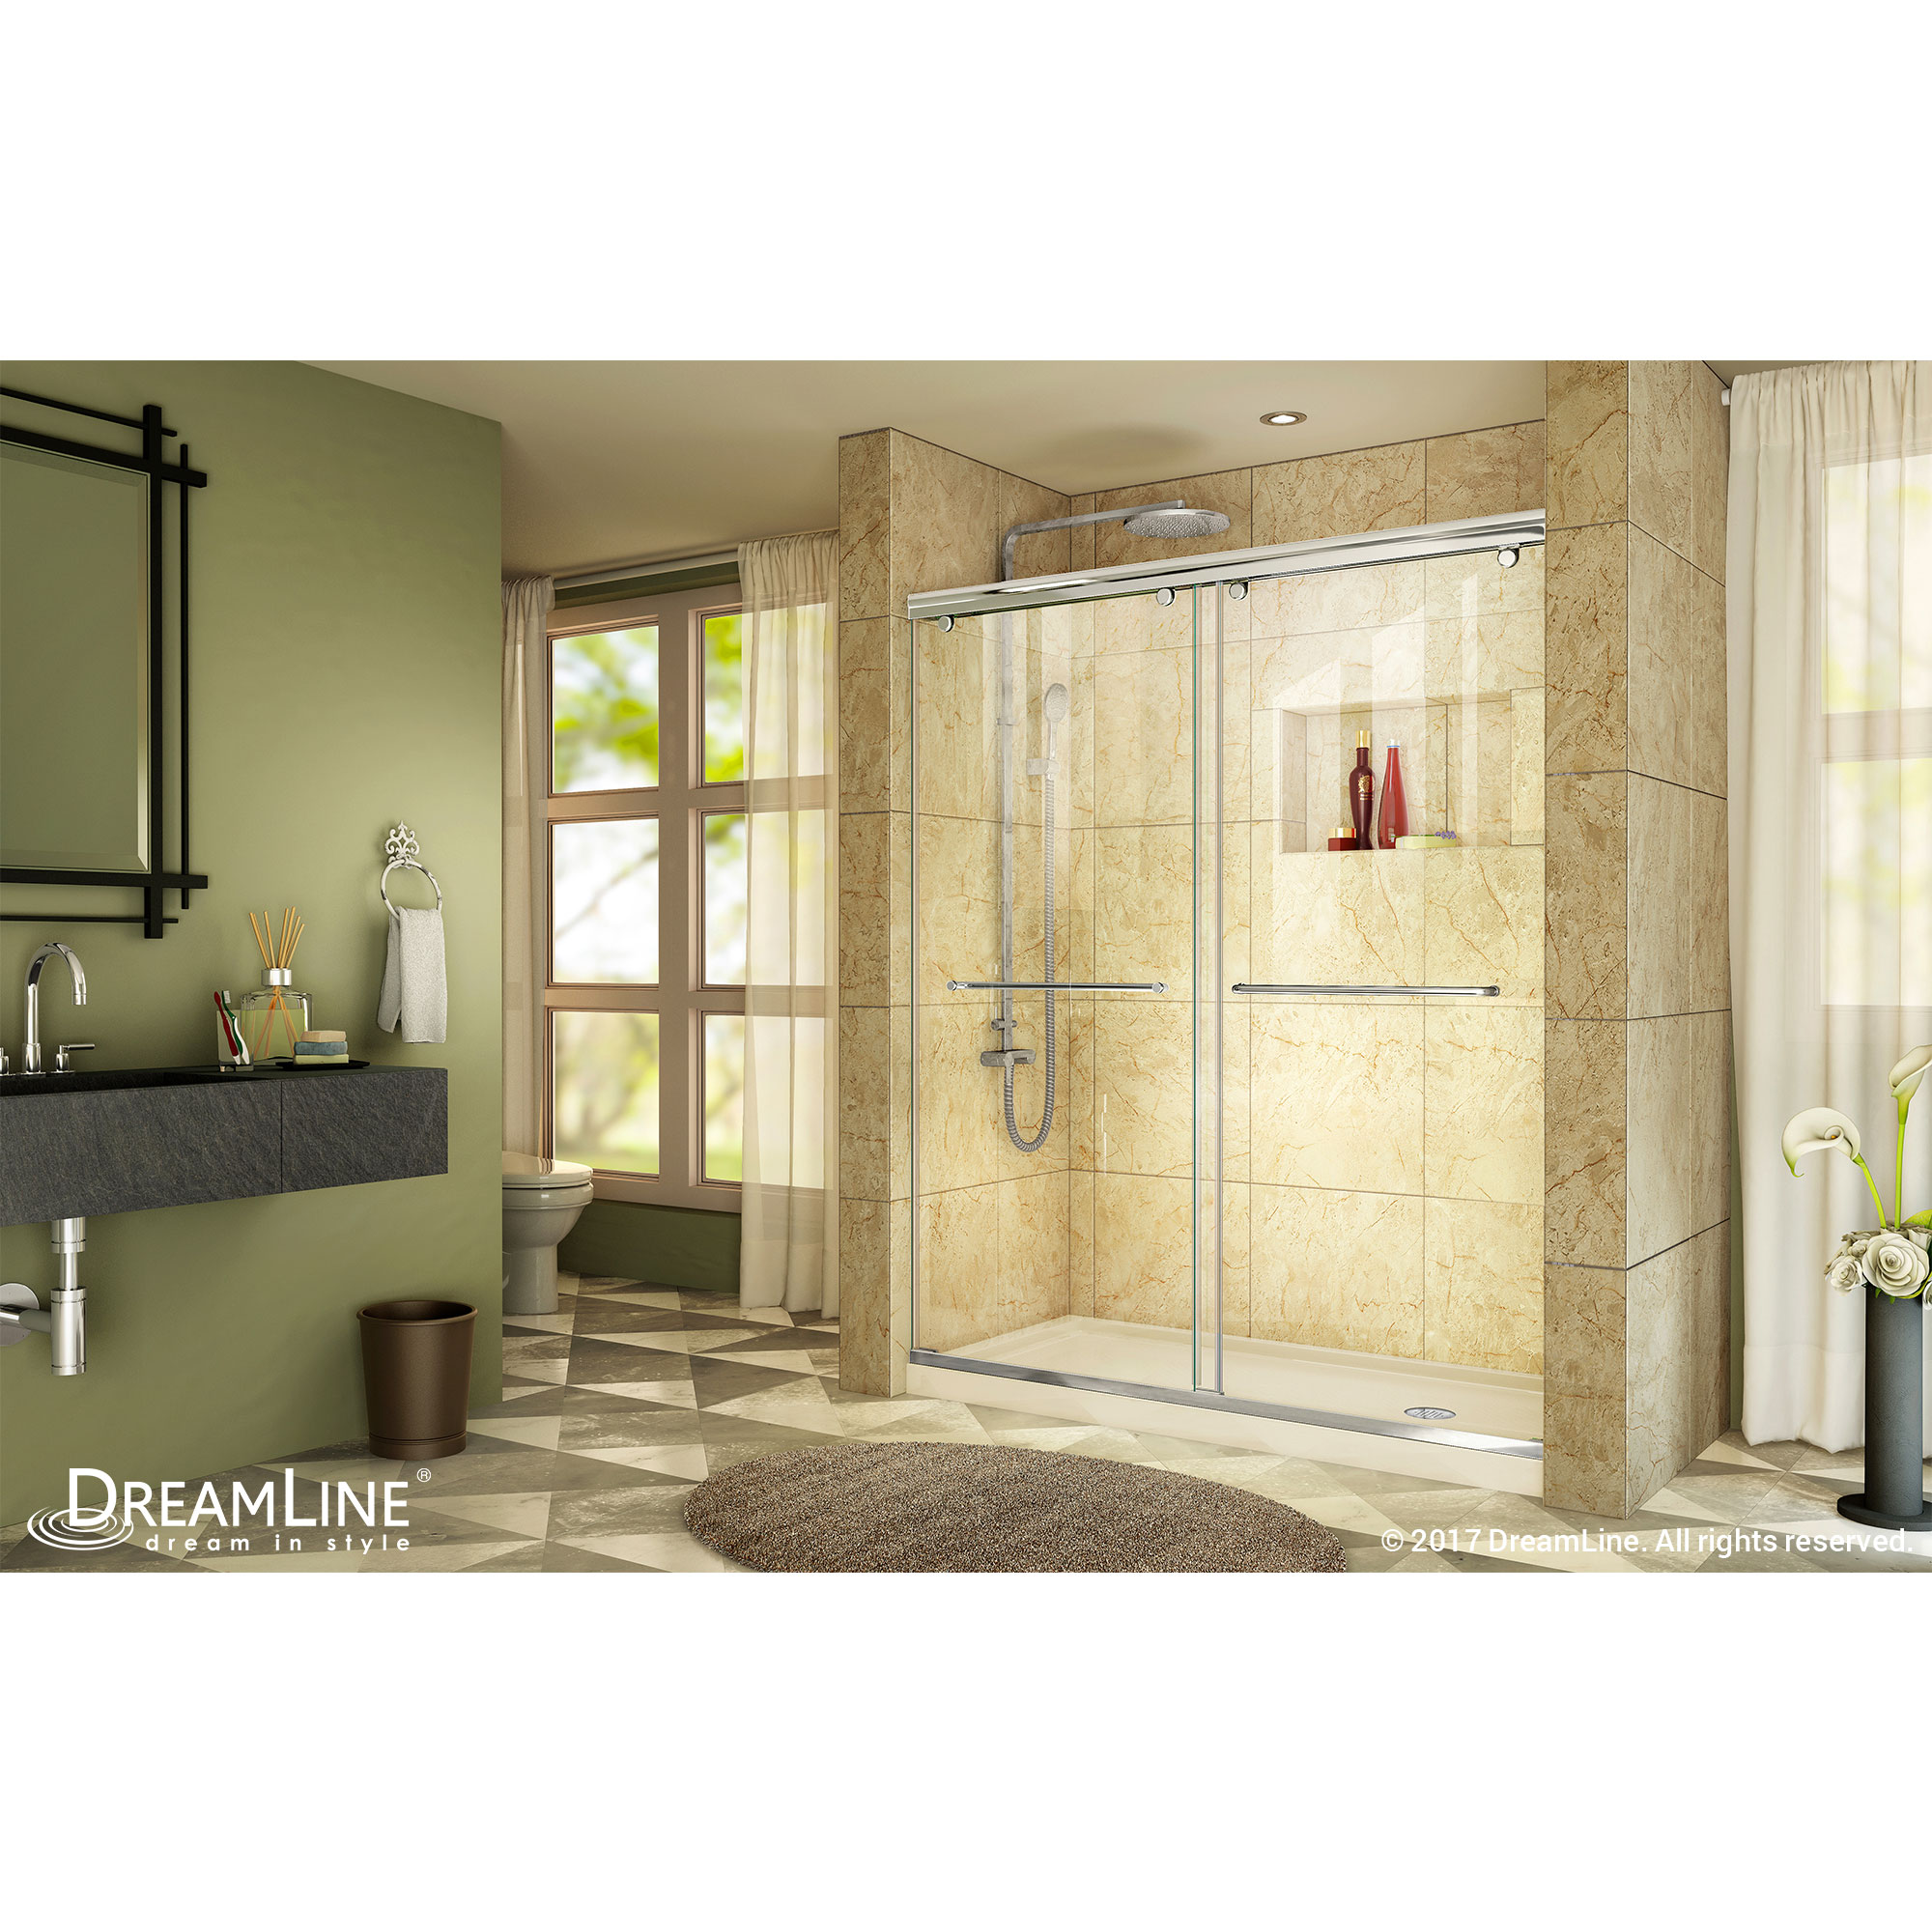 DreamLine Charisma 32 in. D x 60 in. W x 78 3/4 in. H Bypass Shower Door in Chrome with Right Drain Biscuit Base Kit